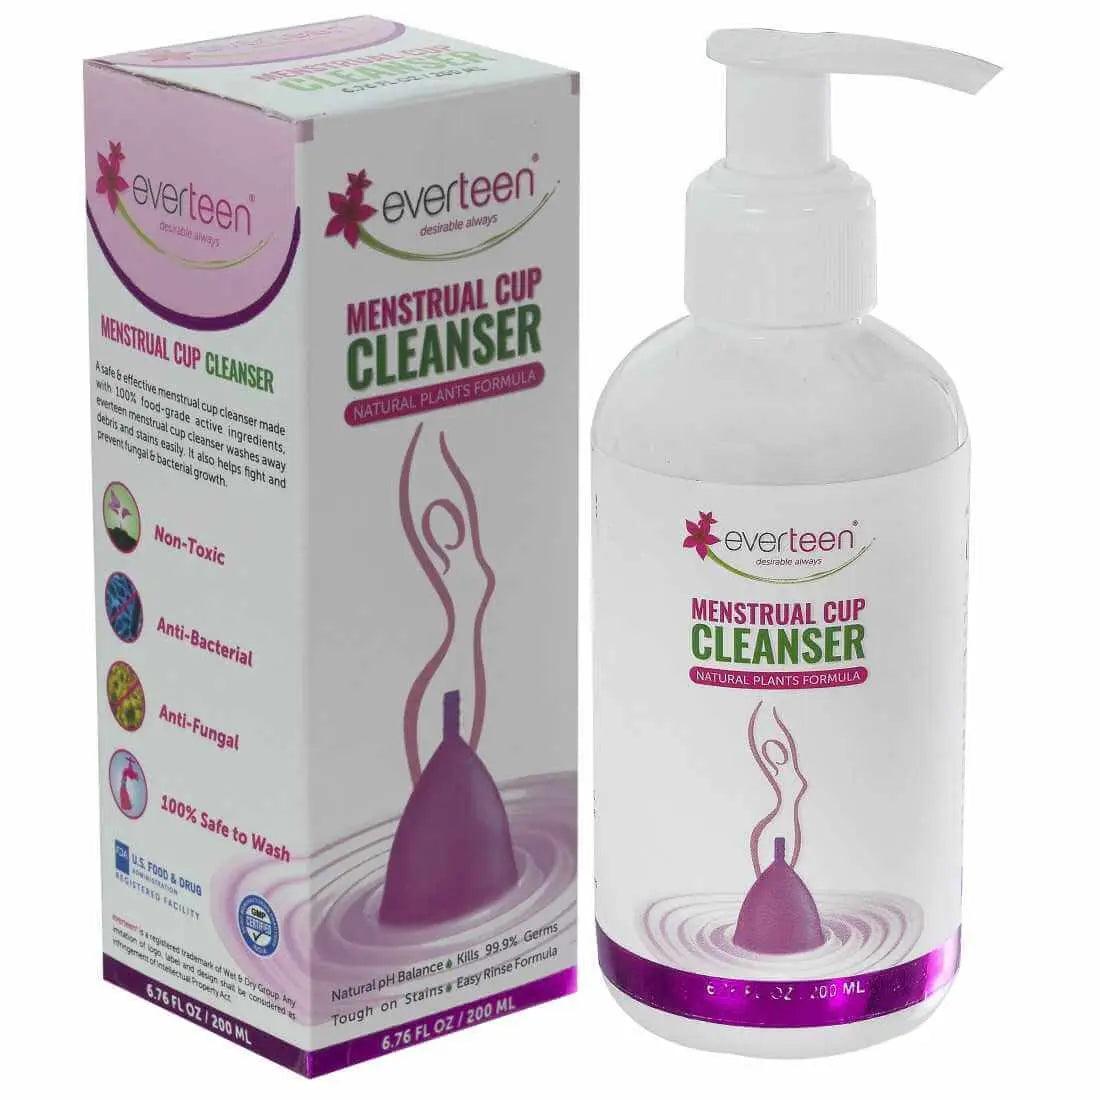 everteen Menstrual Cup Cleanser With Plants Based Formula for Women - 200 ml 8906116280188